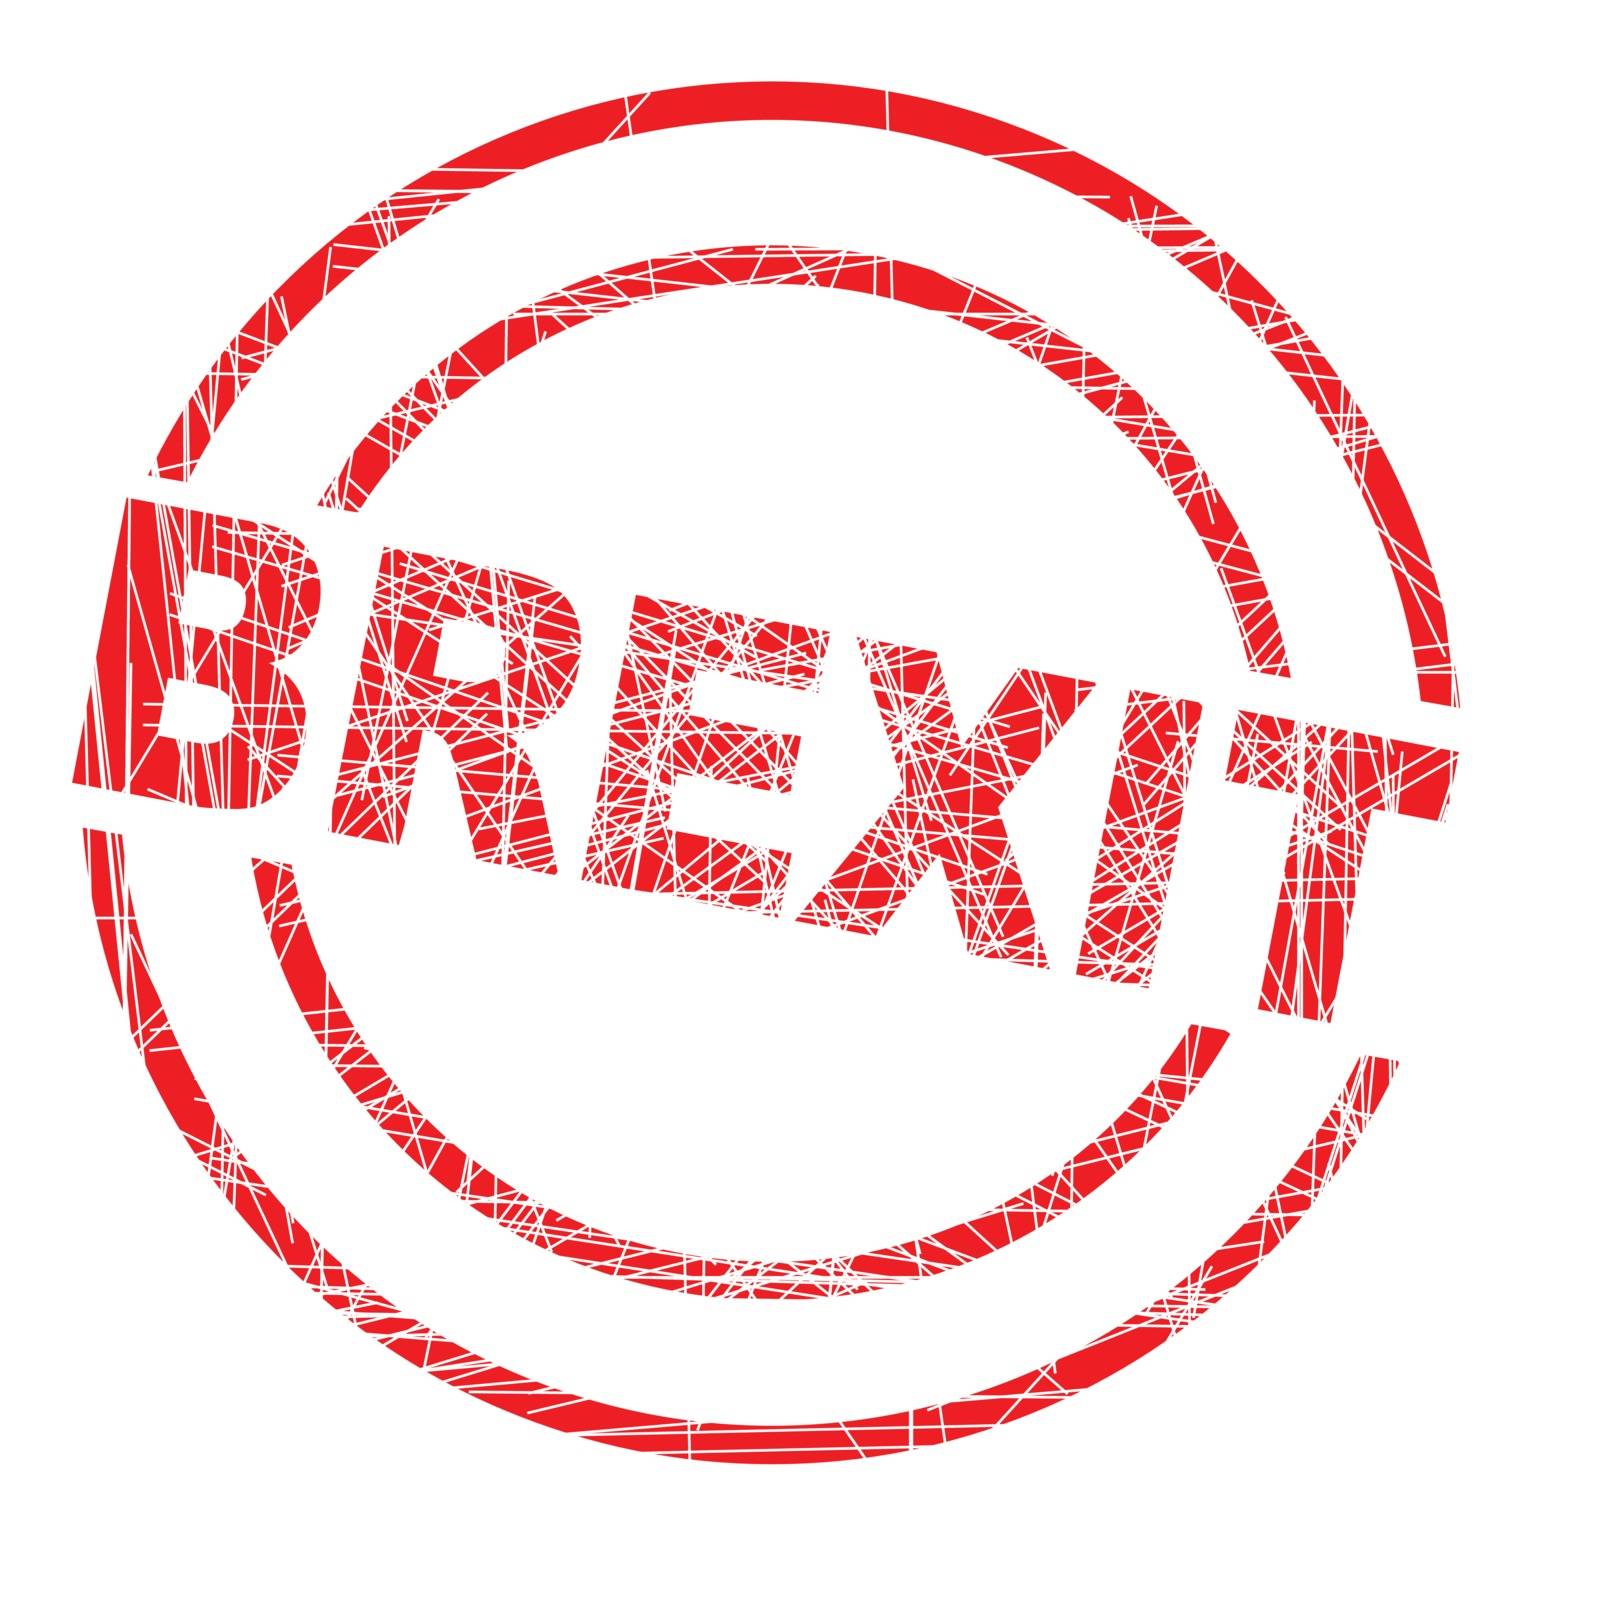 Brexit red ink grunged rubber stamp on a white background